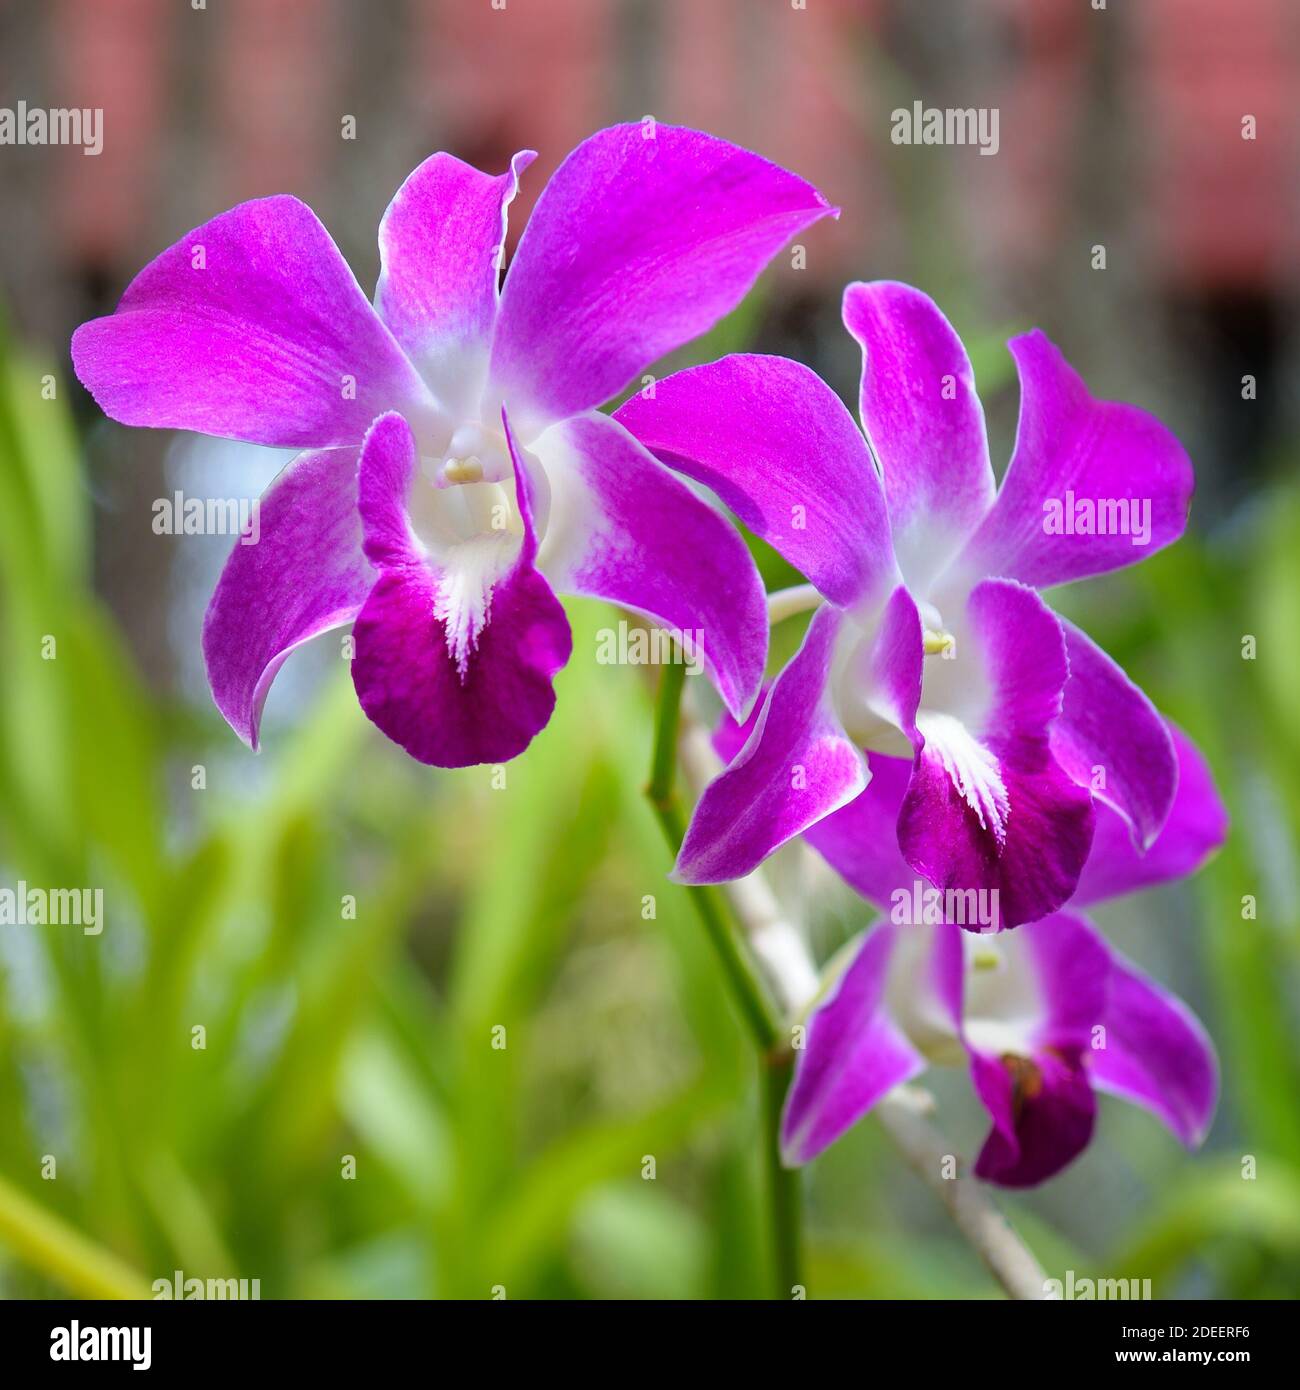 Image of beautiful purple orchid flowers in the garden. Floral background.Selective focus. Stock Photo